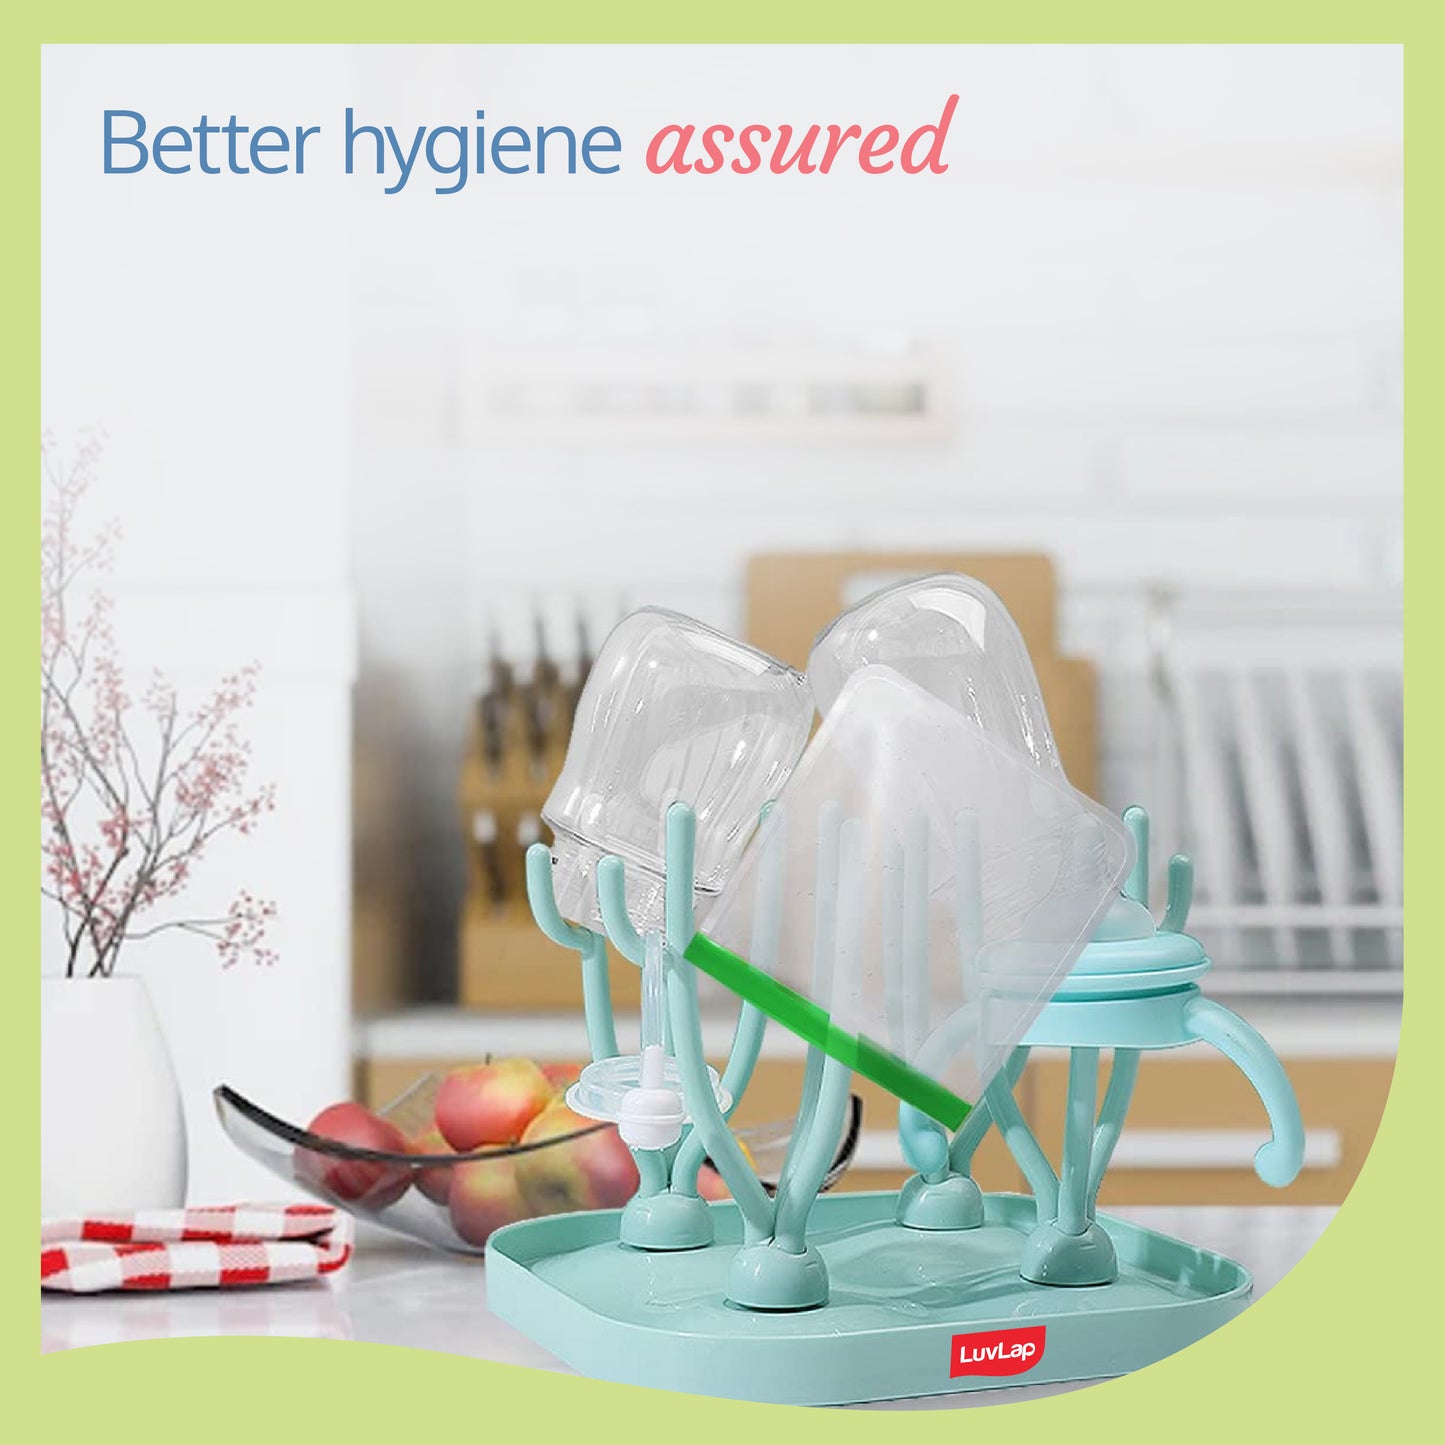 Baby Bottle Drying Rack with Branch Shaped Dryer - Complete Solution for Pacifier, Brush, and Accessories: Easy Sterilization, Cleaning, Storage & Travel (Light Blue)